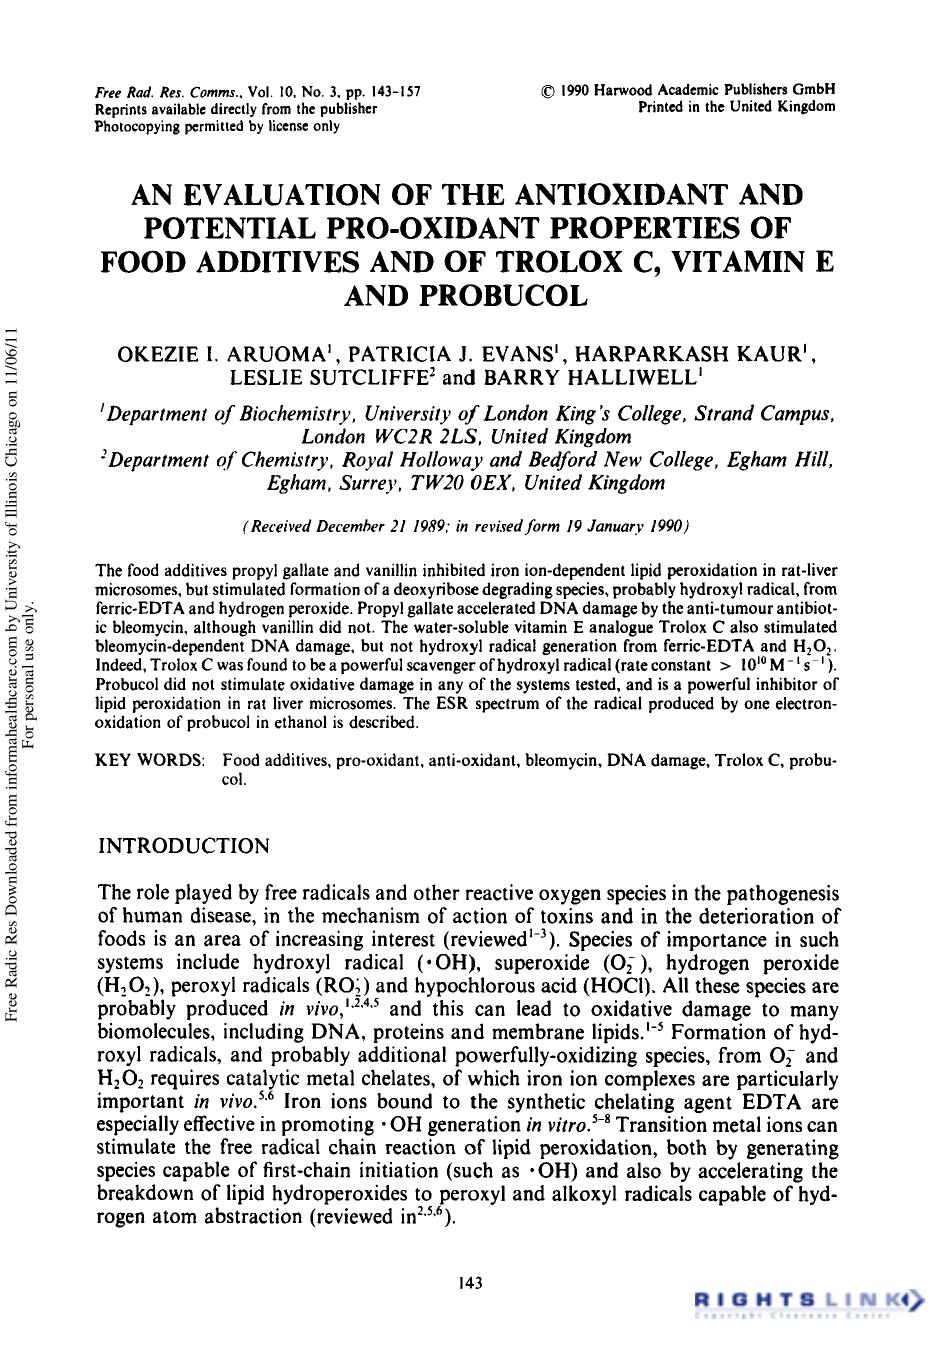 An Evaluation of the Antioxidant and Potential Pro-Oxidant Properties of Food Additives and the Trolox C., Vitamin E and Probucol by Okezie I. Aruoma1 Patricia J. Evans1 Harparkash Kaur1 Leslie Sutcliffe2 & Barry Halliwell1